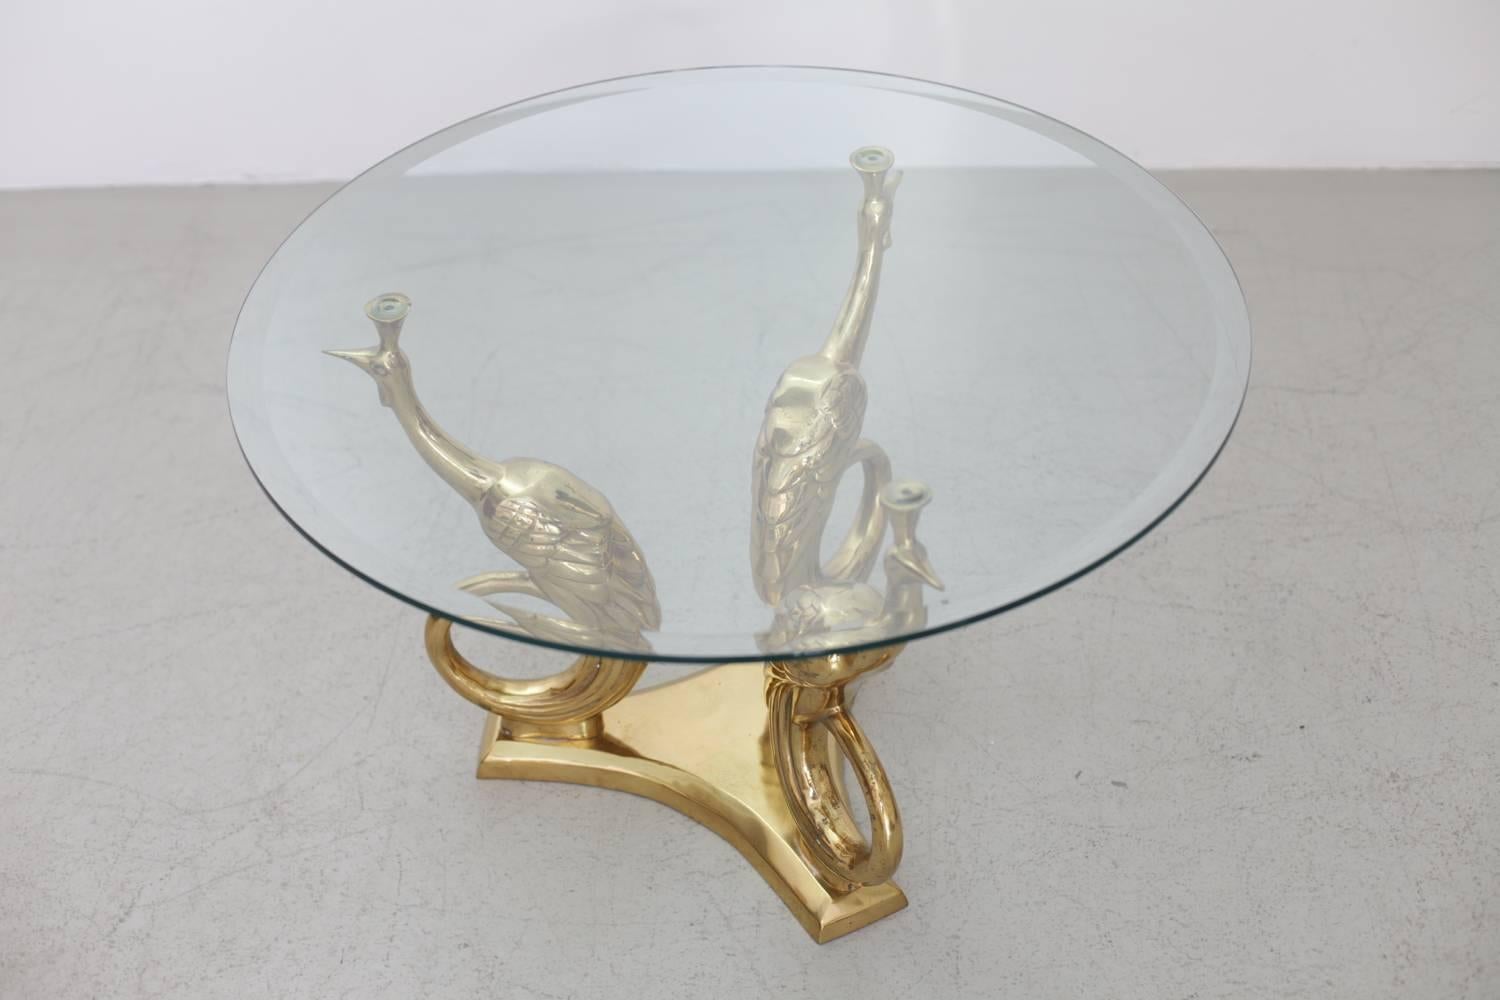 Very elegant coffee or side table in brass and glass. The glass tabletop is holded by three peacocks. The table is a really eyecatcher. The same table in an other form is also listed.